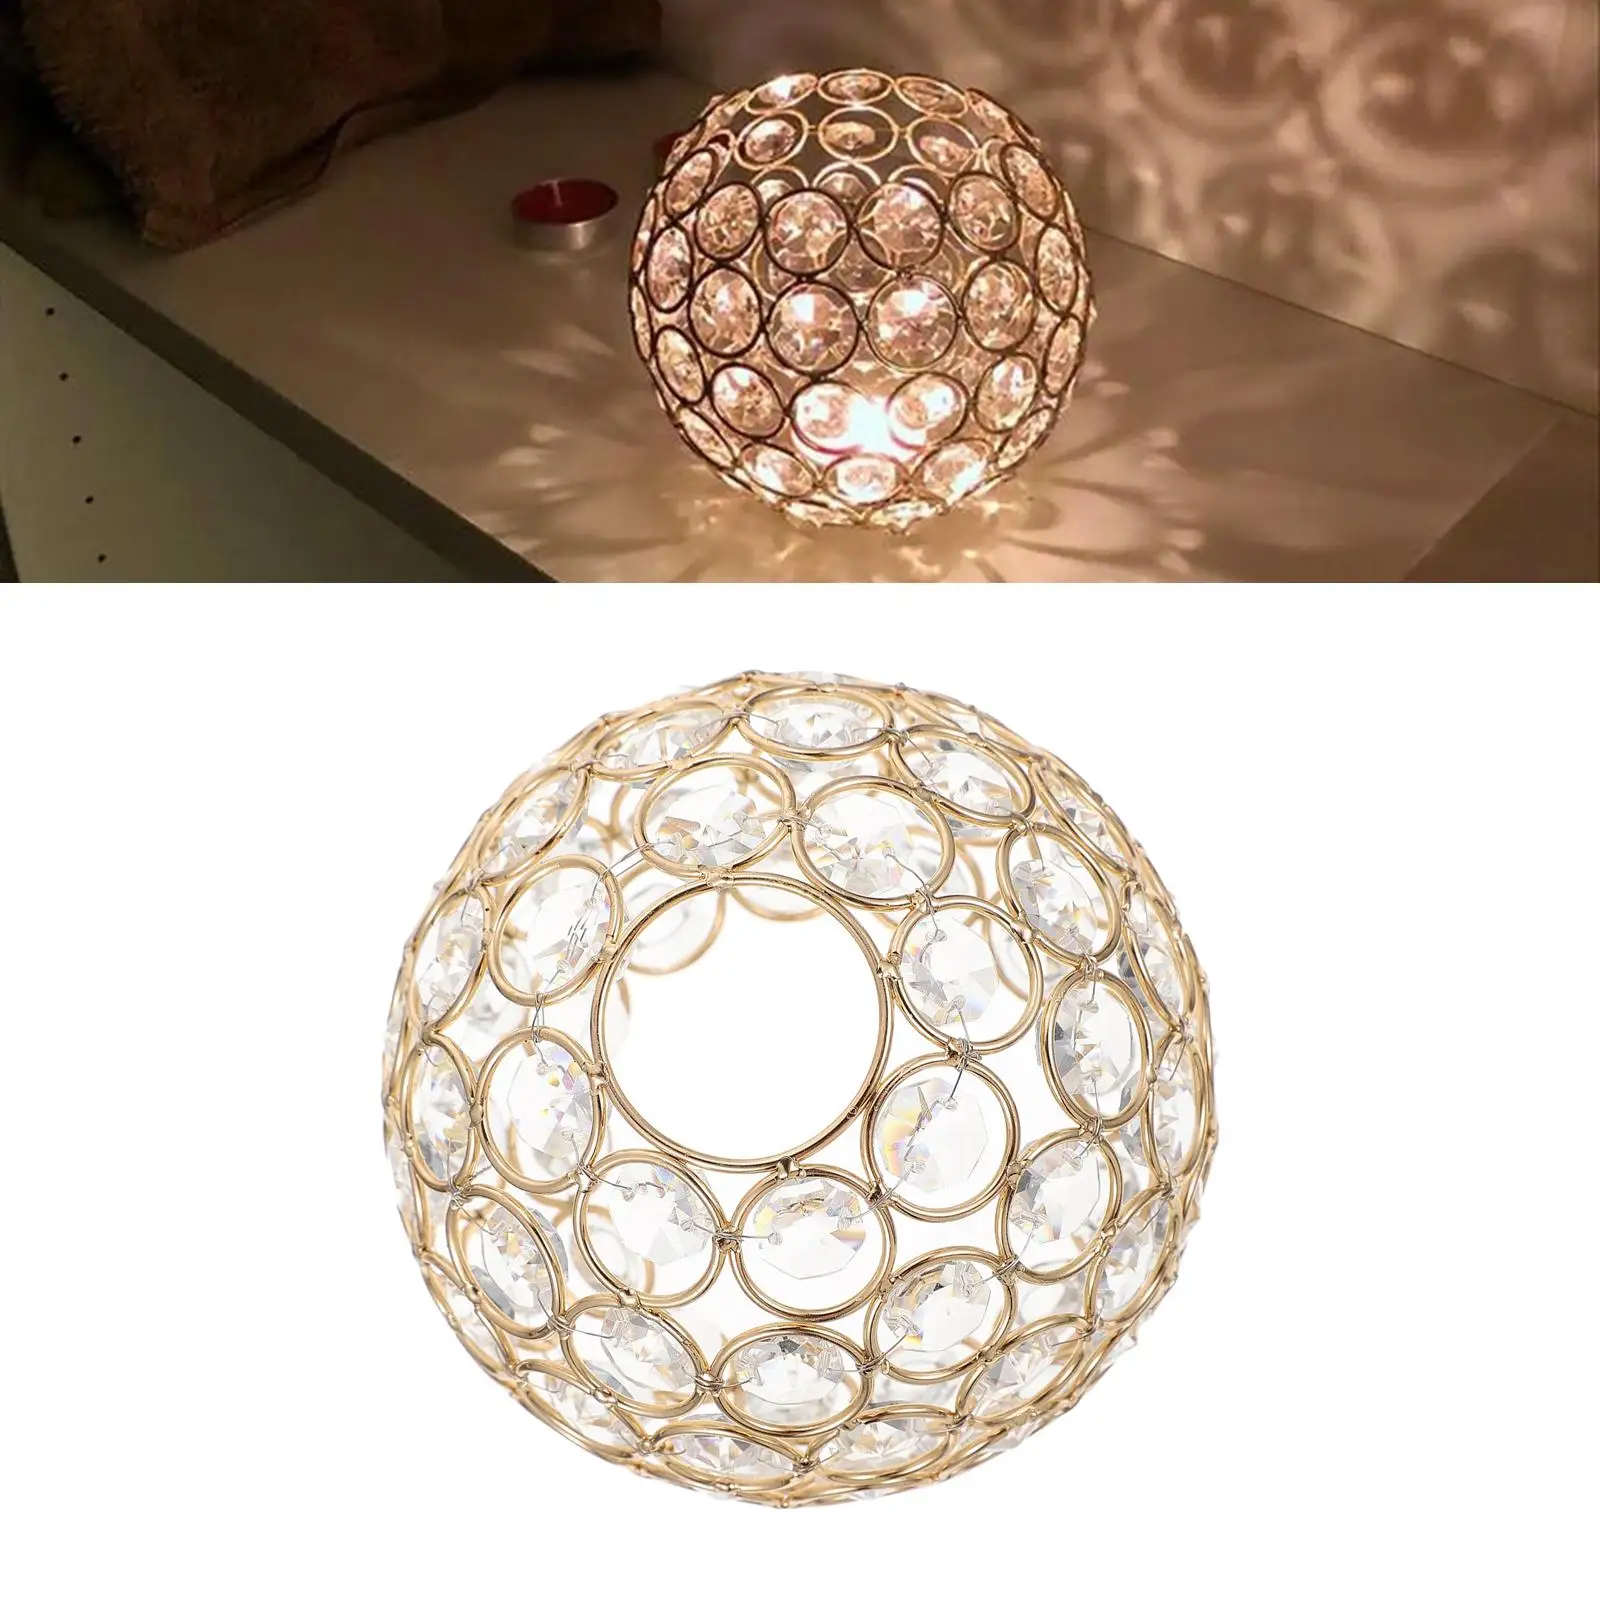 Ceiling Light Shade Replacement Cover Bathroom College Crystal Lampshade